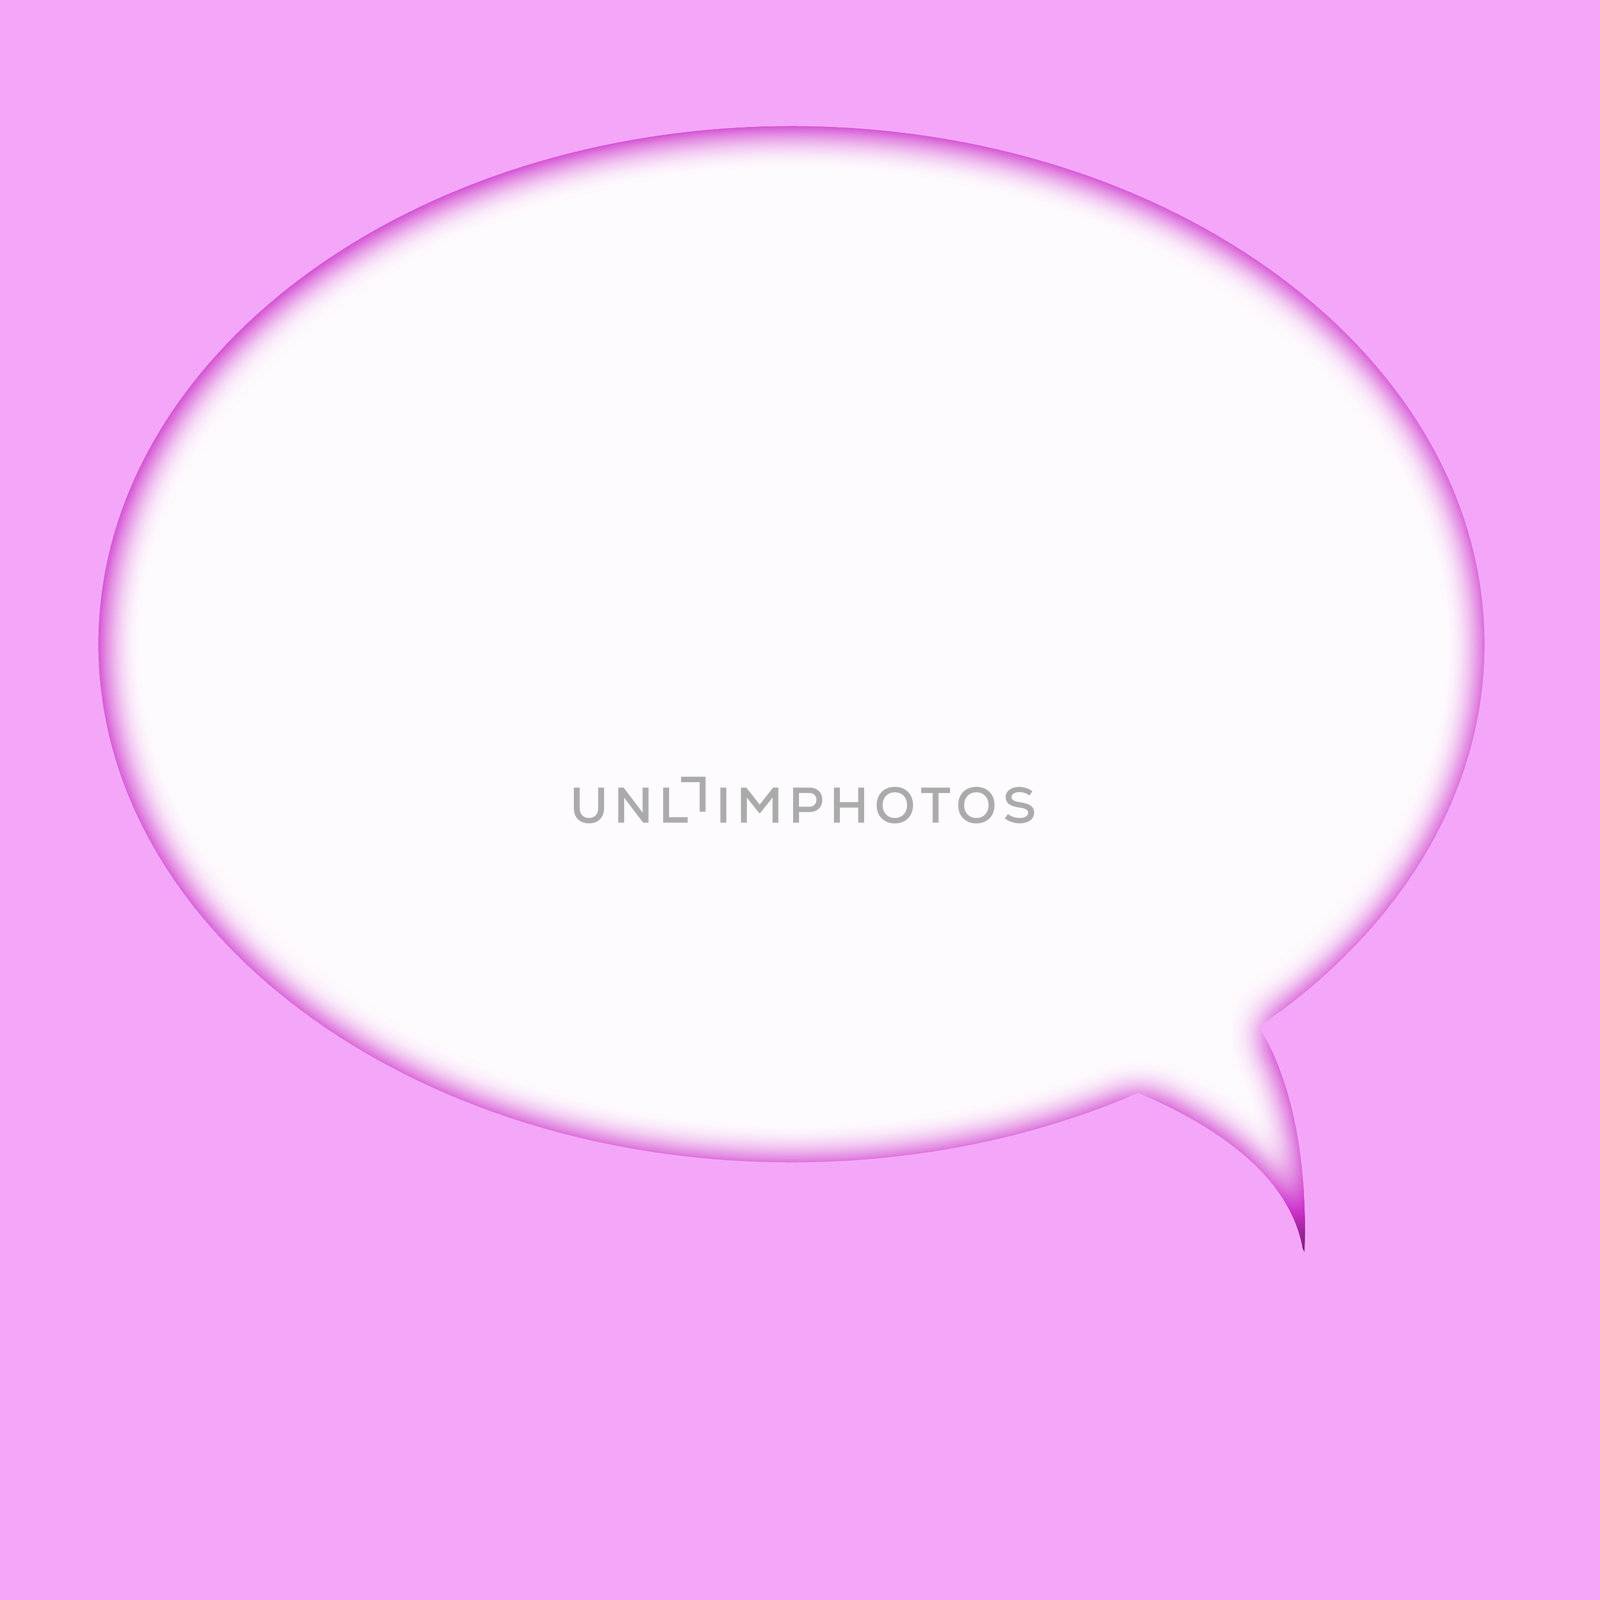 Computer designed speech bubble on pink background